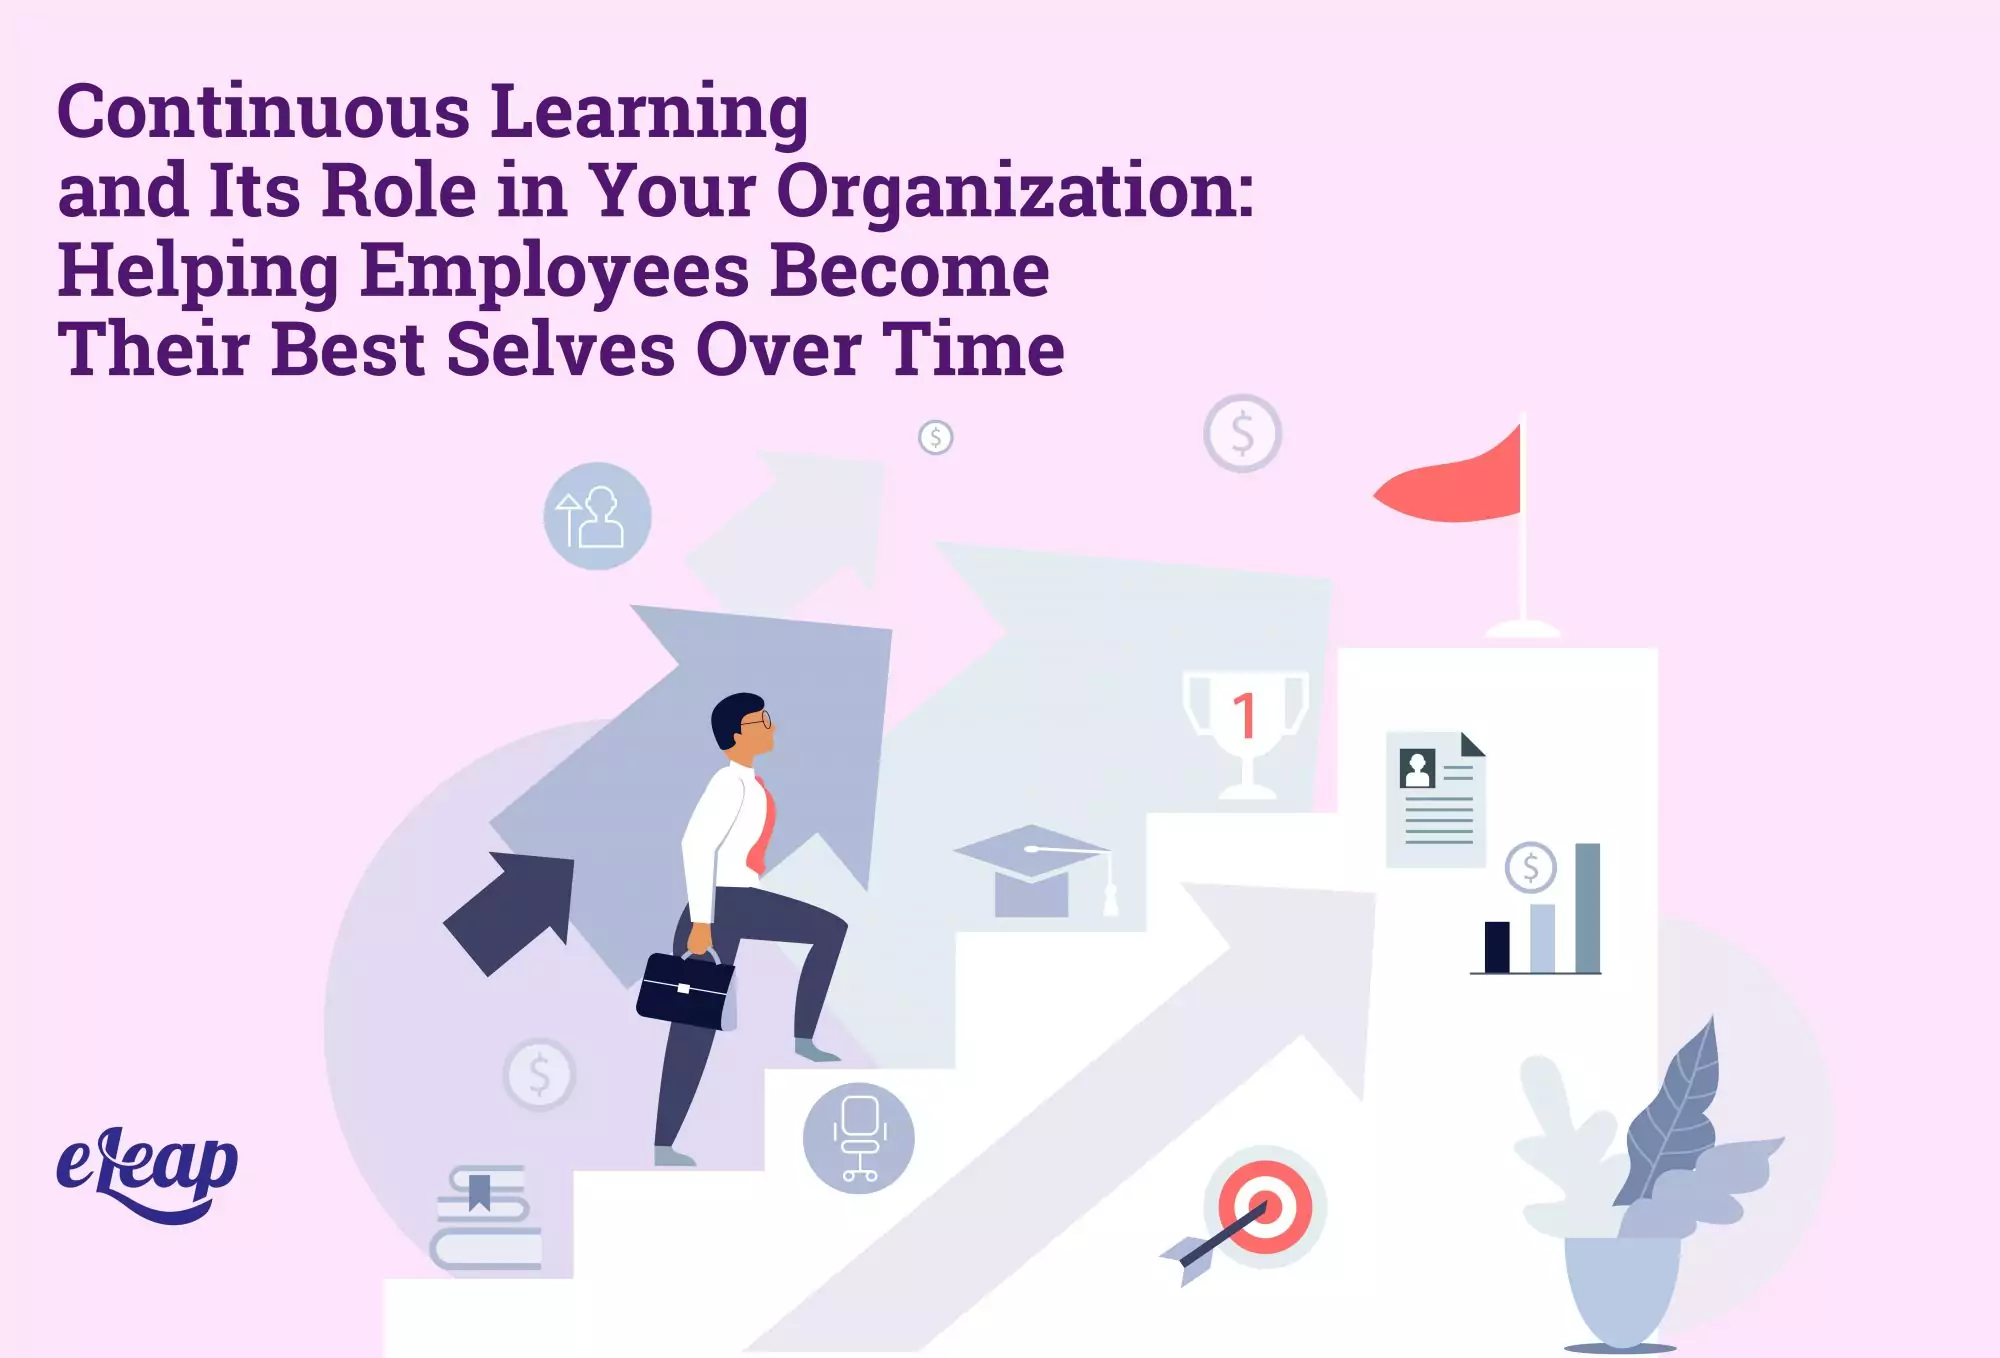 Continuous Learning and Its Role in Your Organization: Helping Employees Become Their Best Selves Over Time